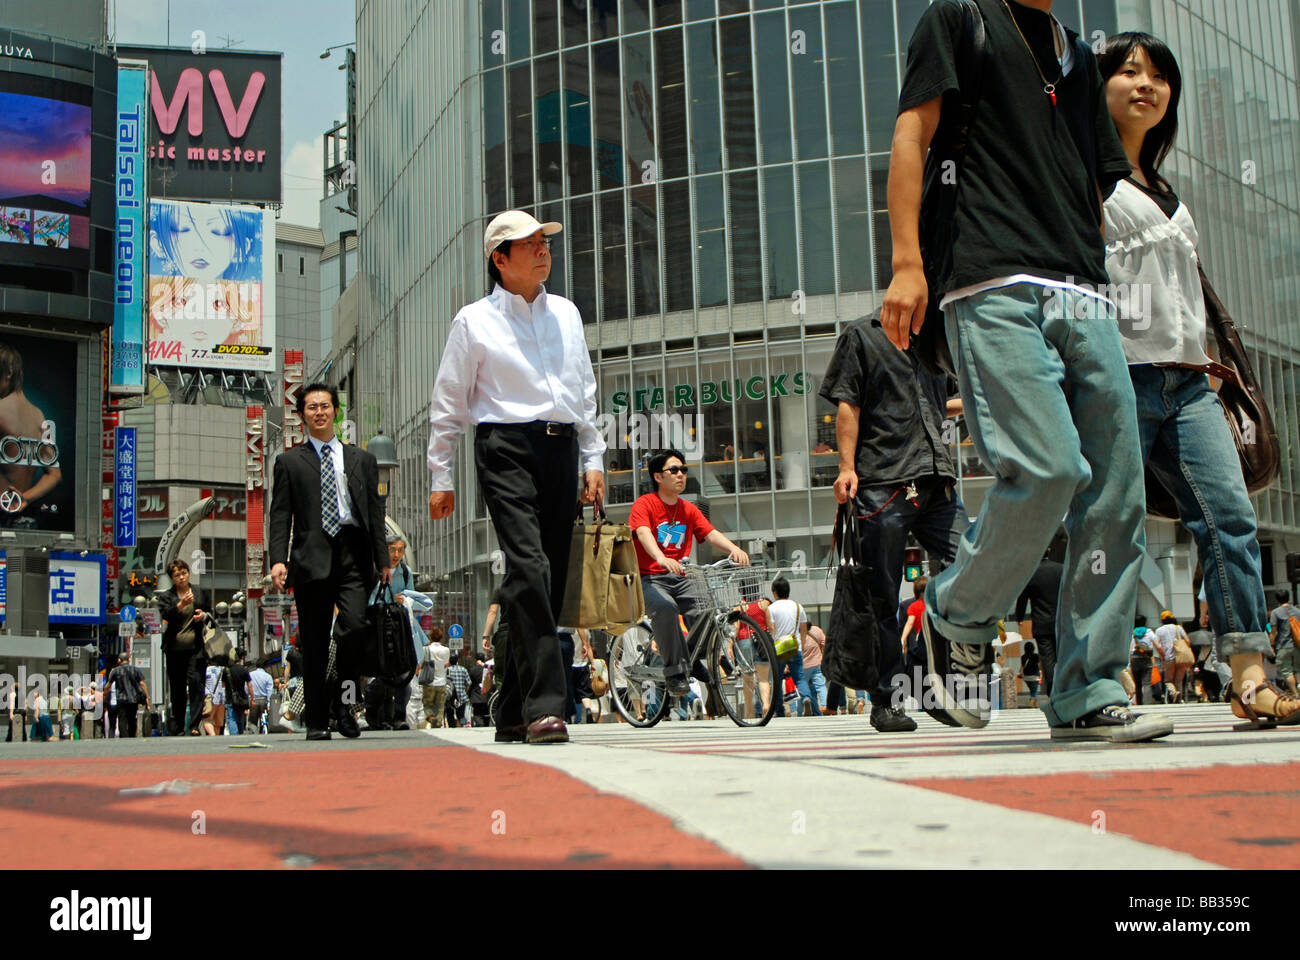 JAPAN, Tokyo. Japanese pedestrains crossing the street, a Starbucks and huge TV screens in the background Stock Photo